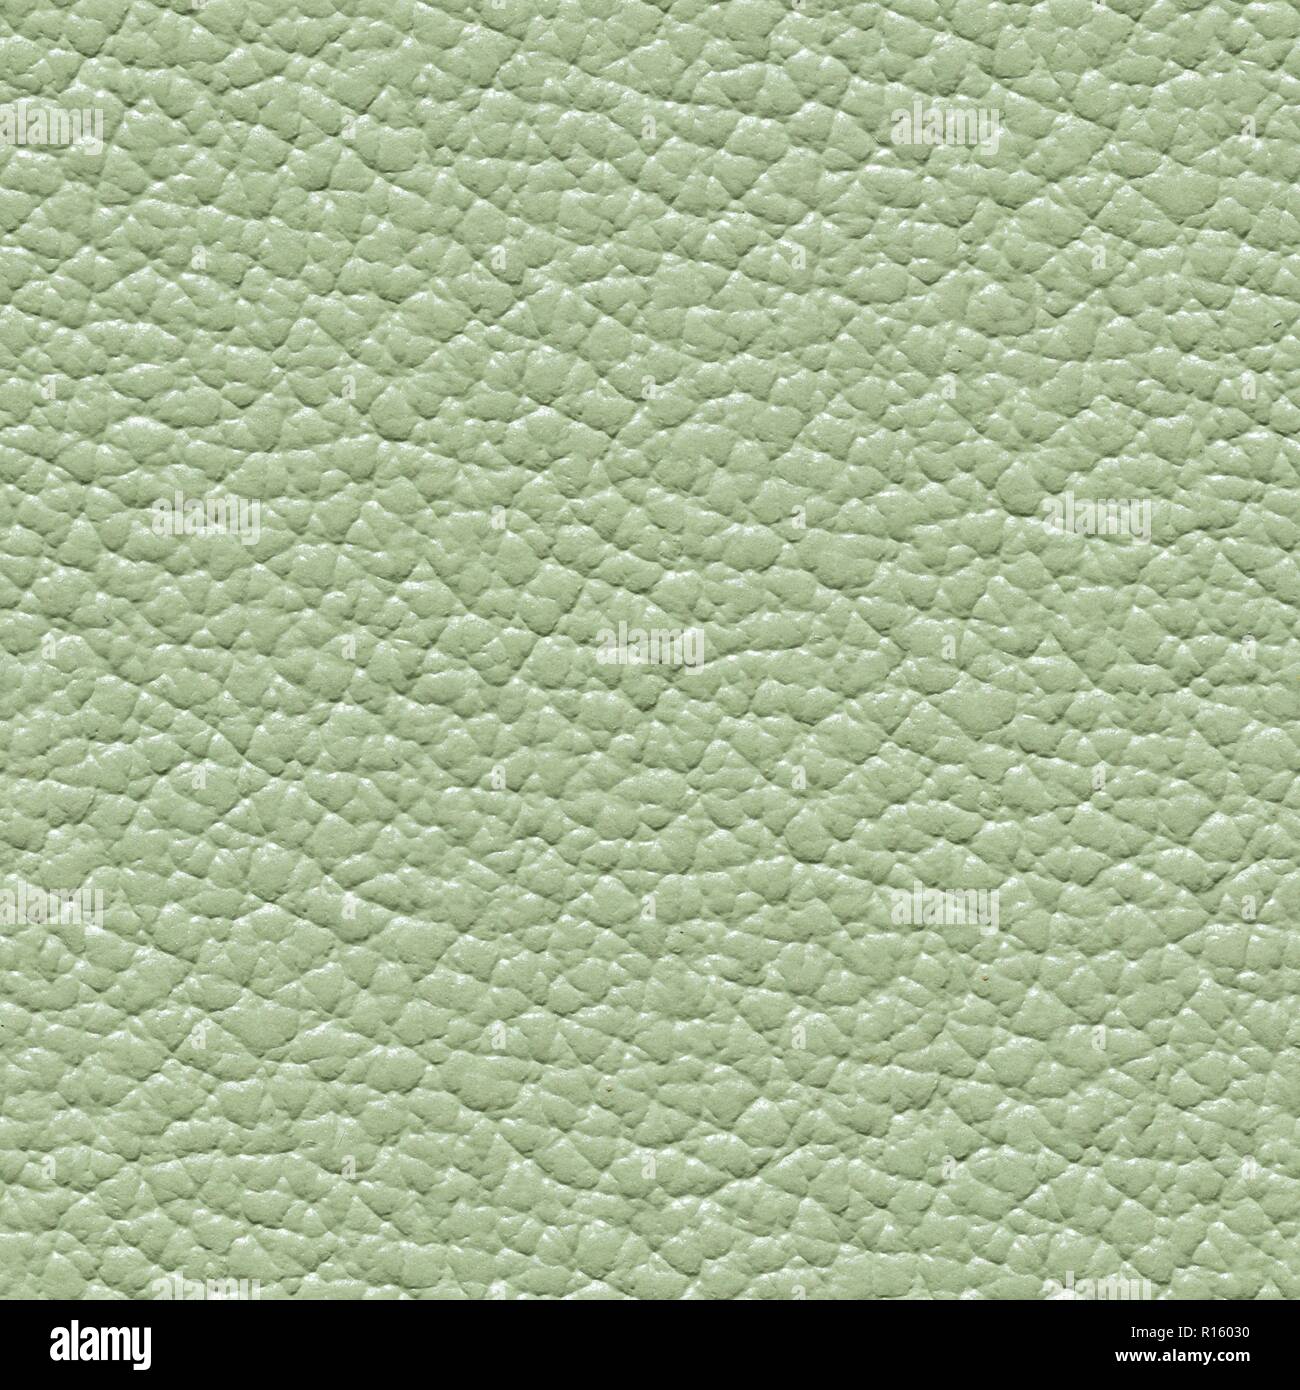 Fashion light green leather background. Seamless square texture. Stock Photo